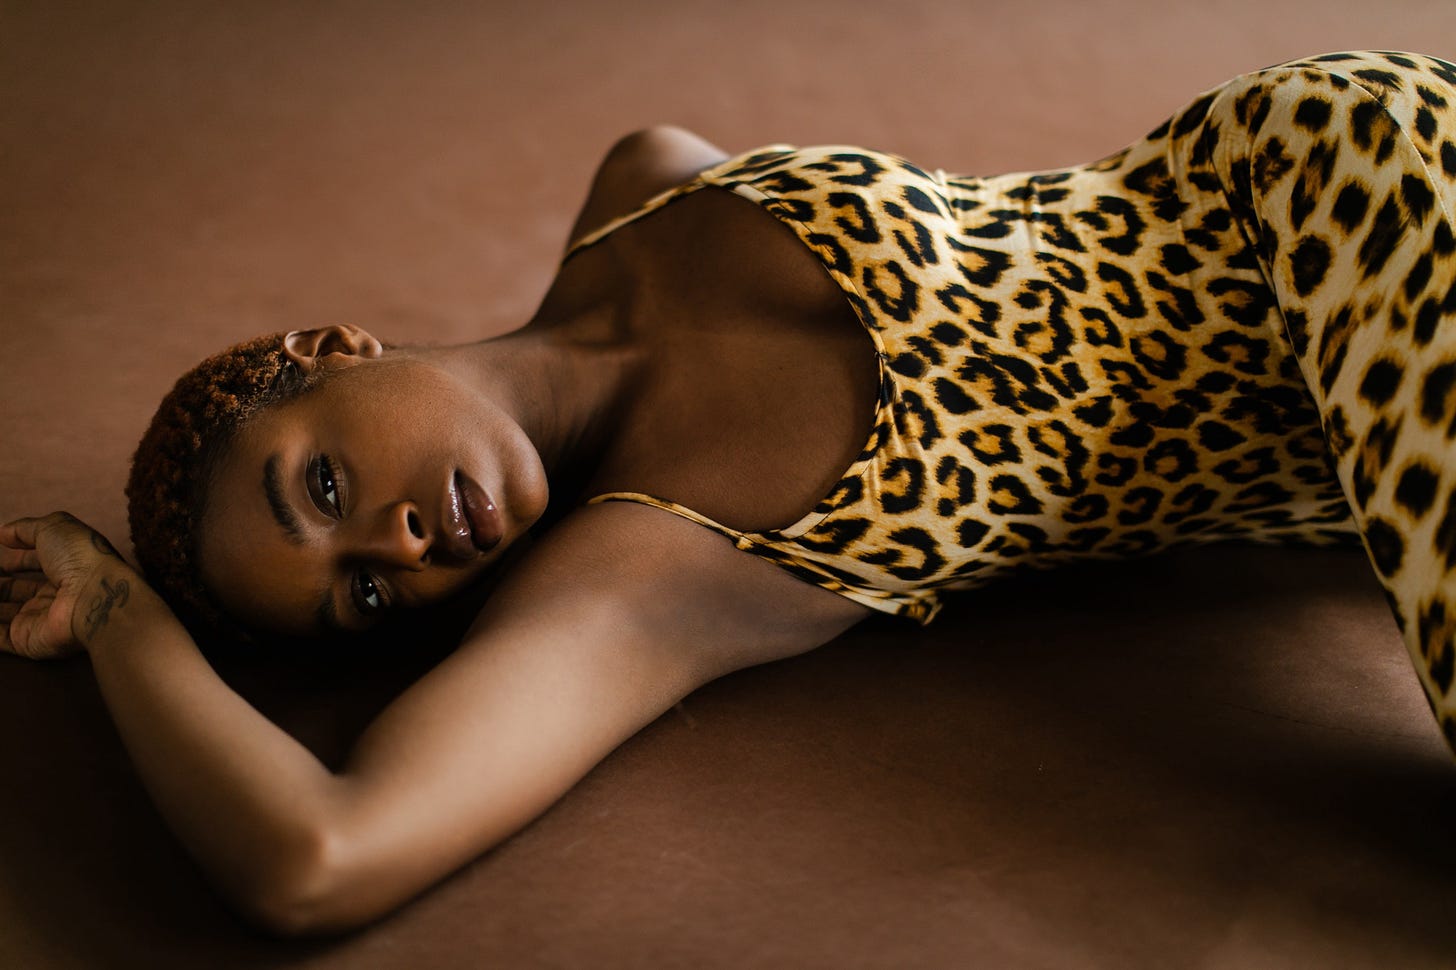 Attractive black woman with short-cropped hair reclining senusuously against a brown background in sensuous leopard tights